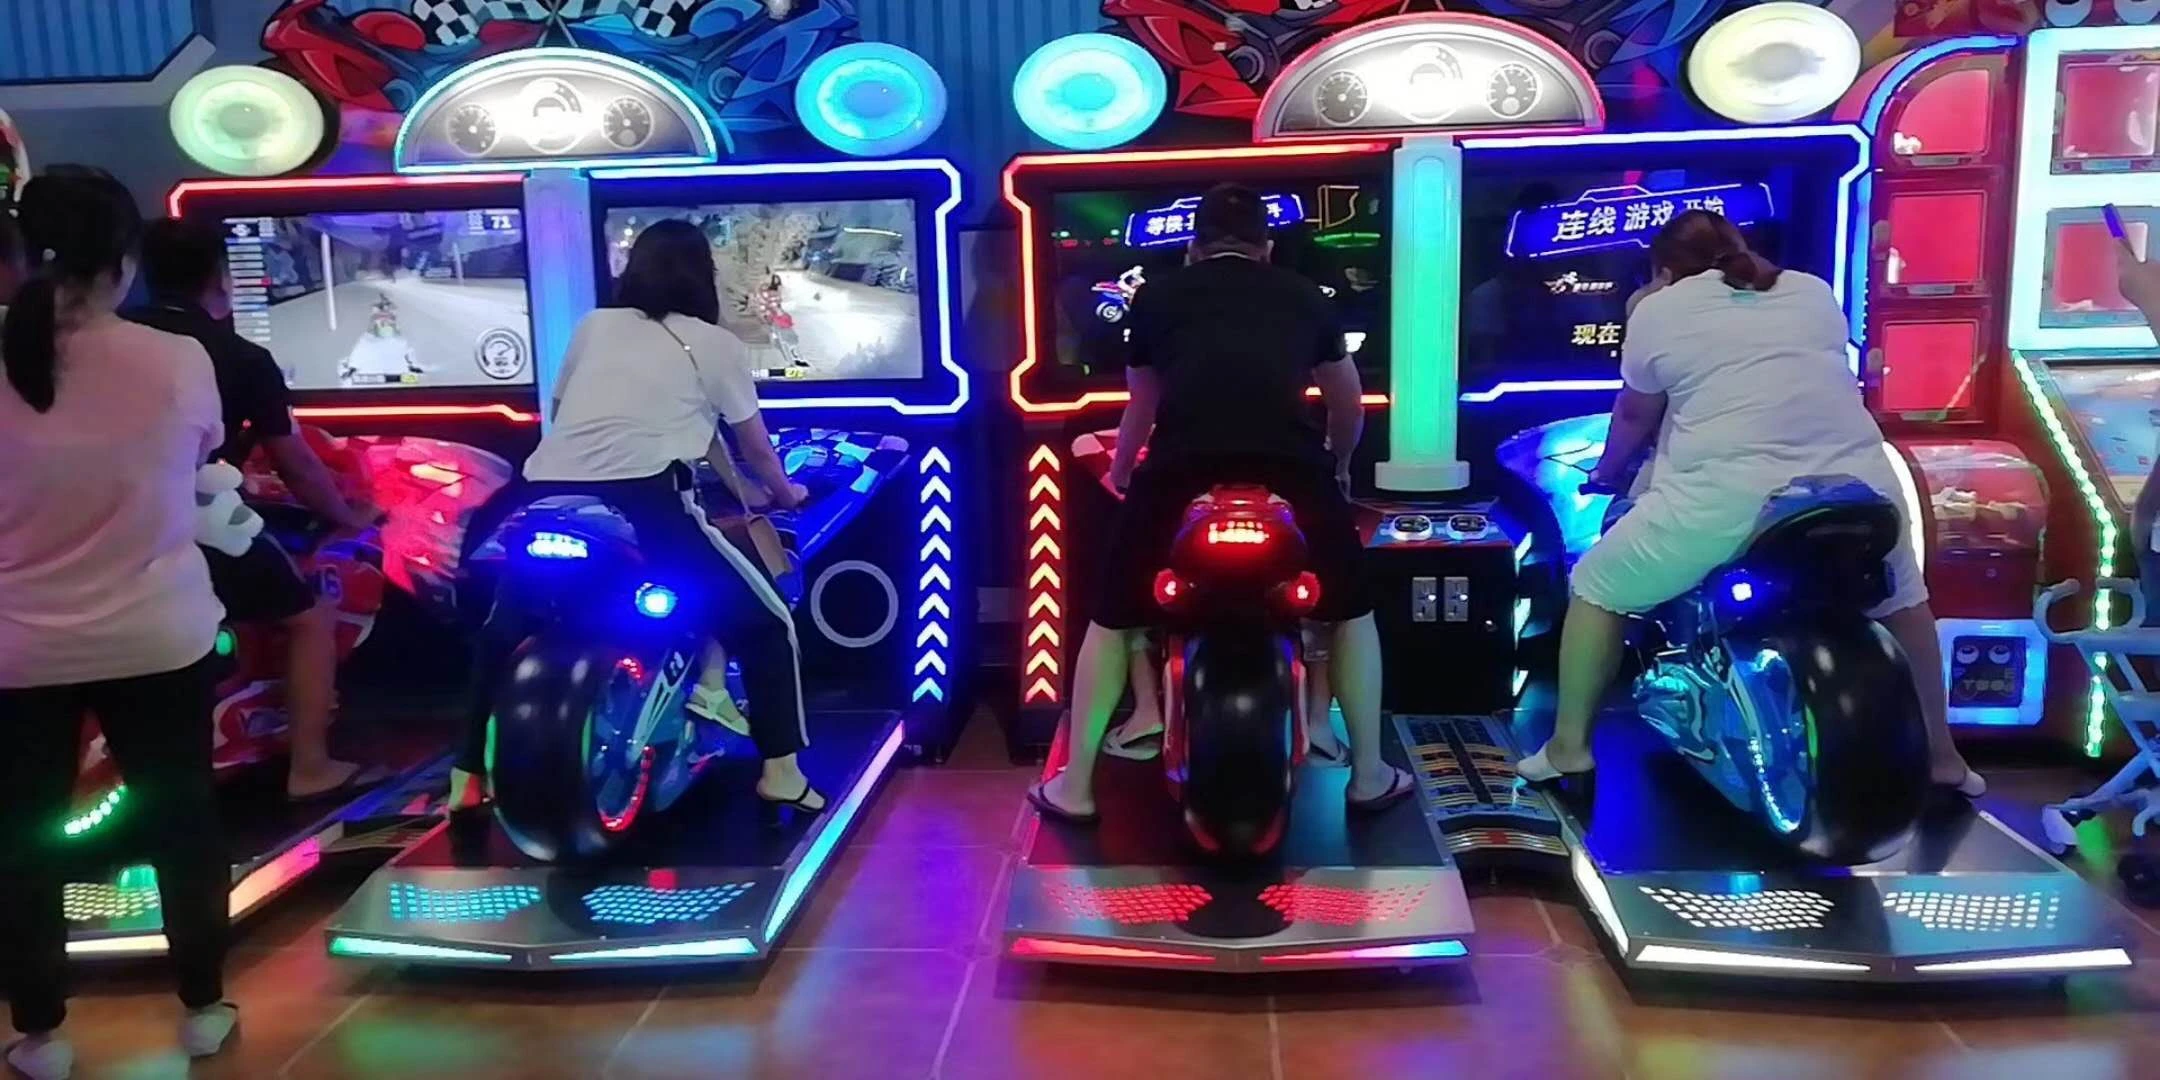 Coin Operated Games Electric Simulator Racing Motorcycle Arcade Video Game Machine